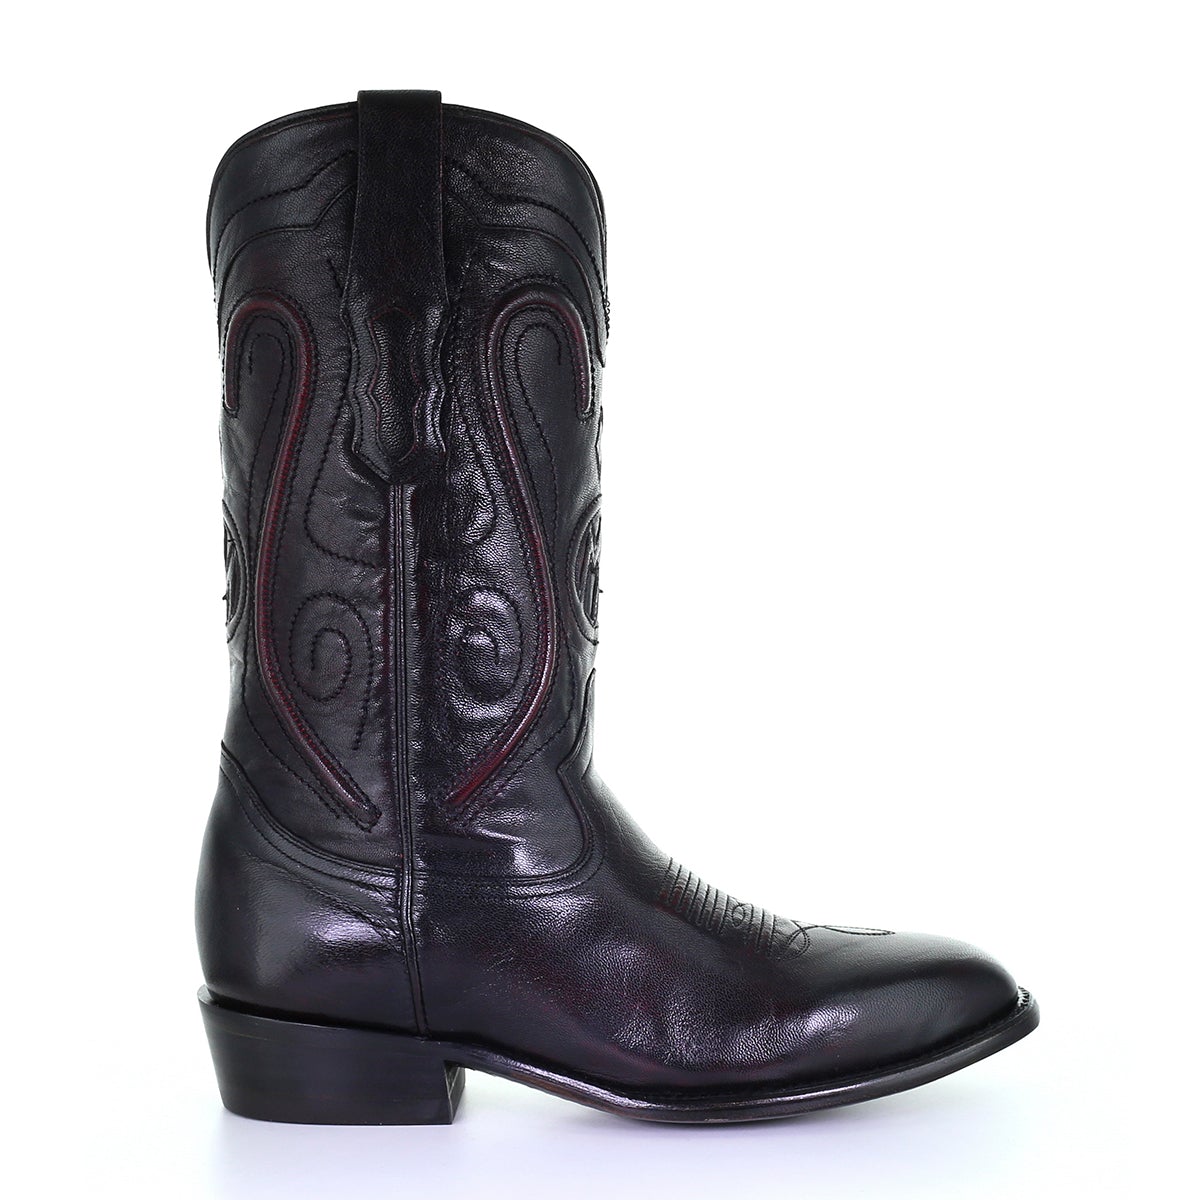 M2137 - Montana black cherry traditional cowboy cowhide leather boots for men-Kuet.us